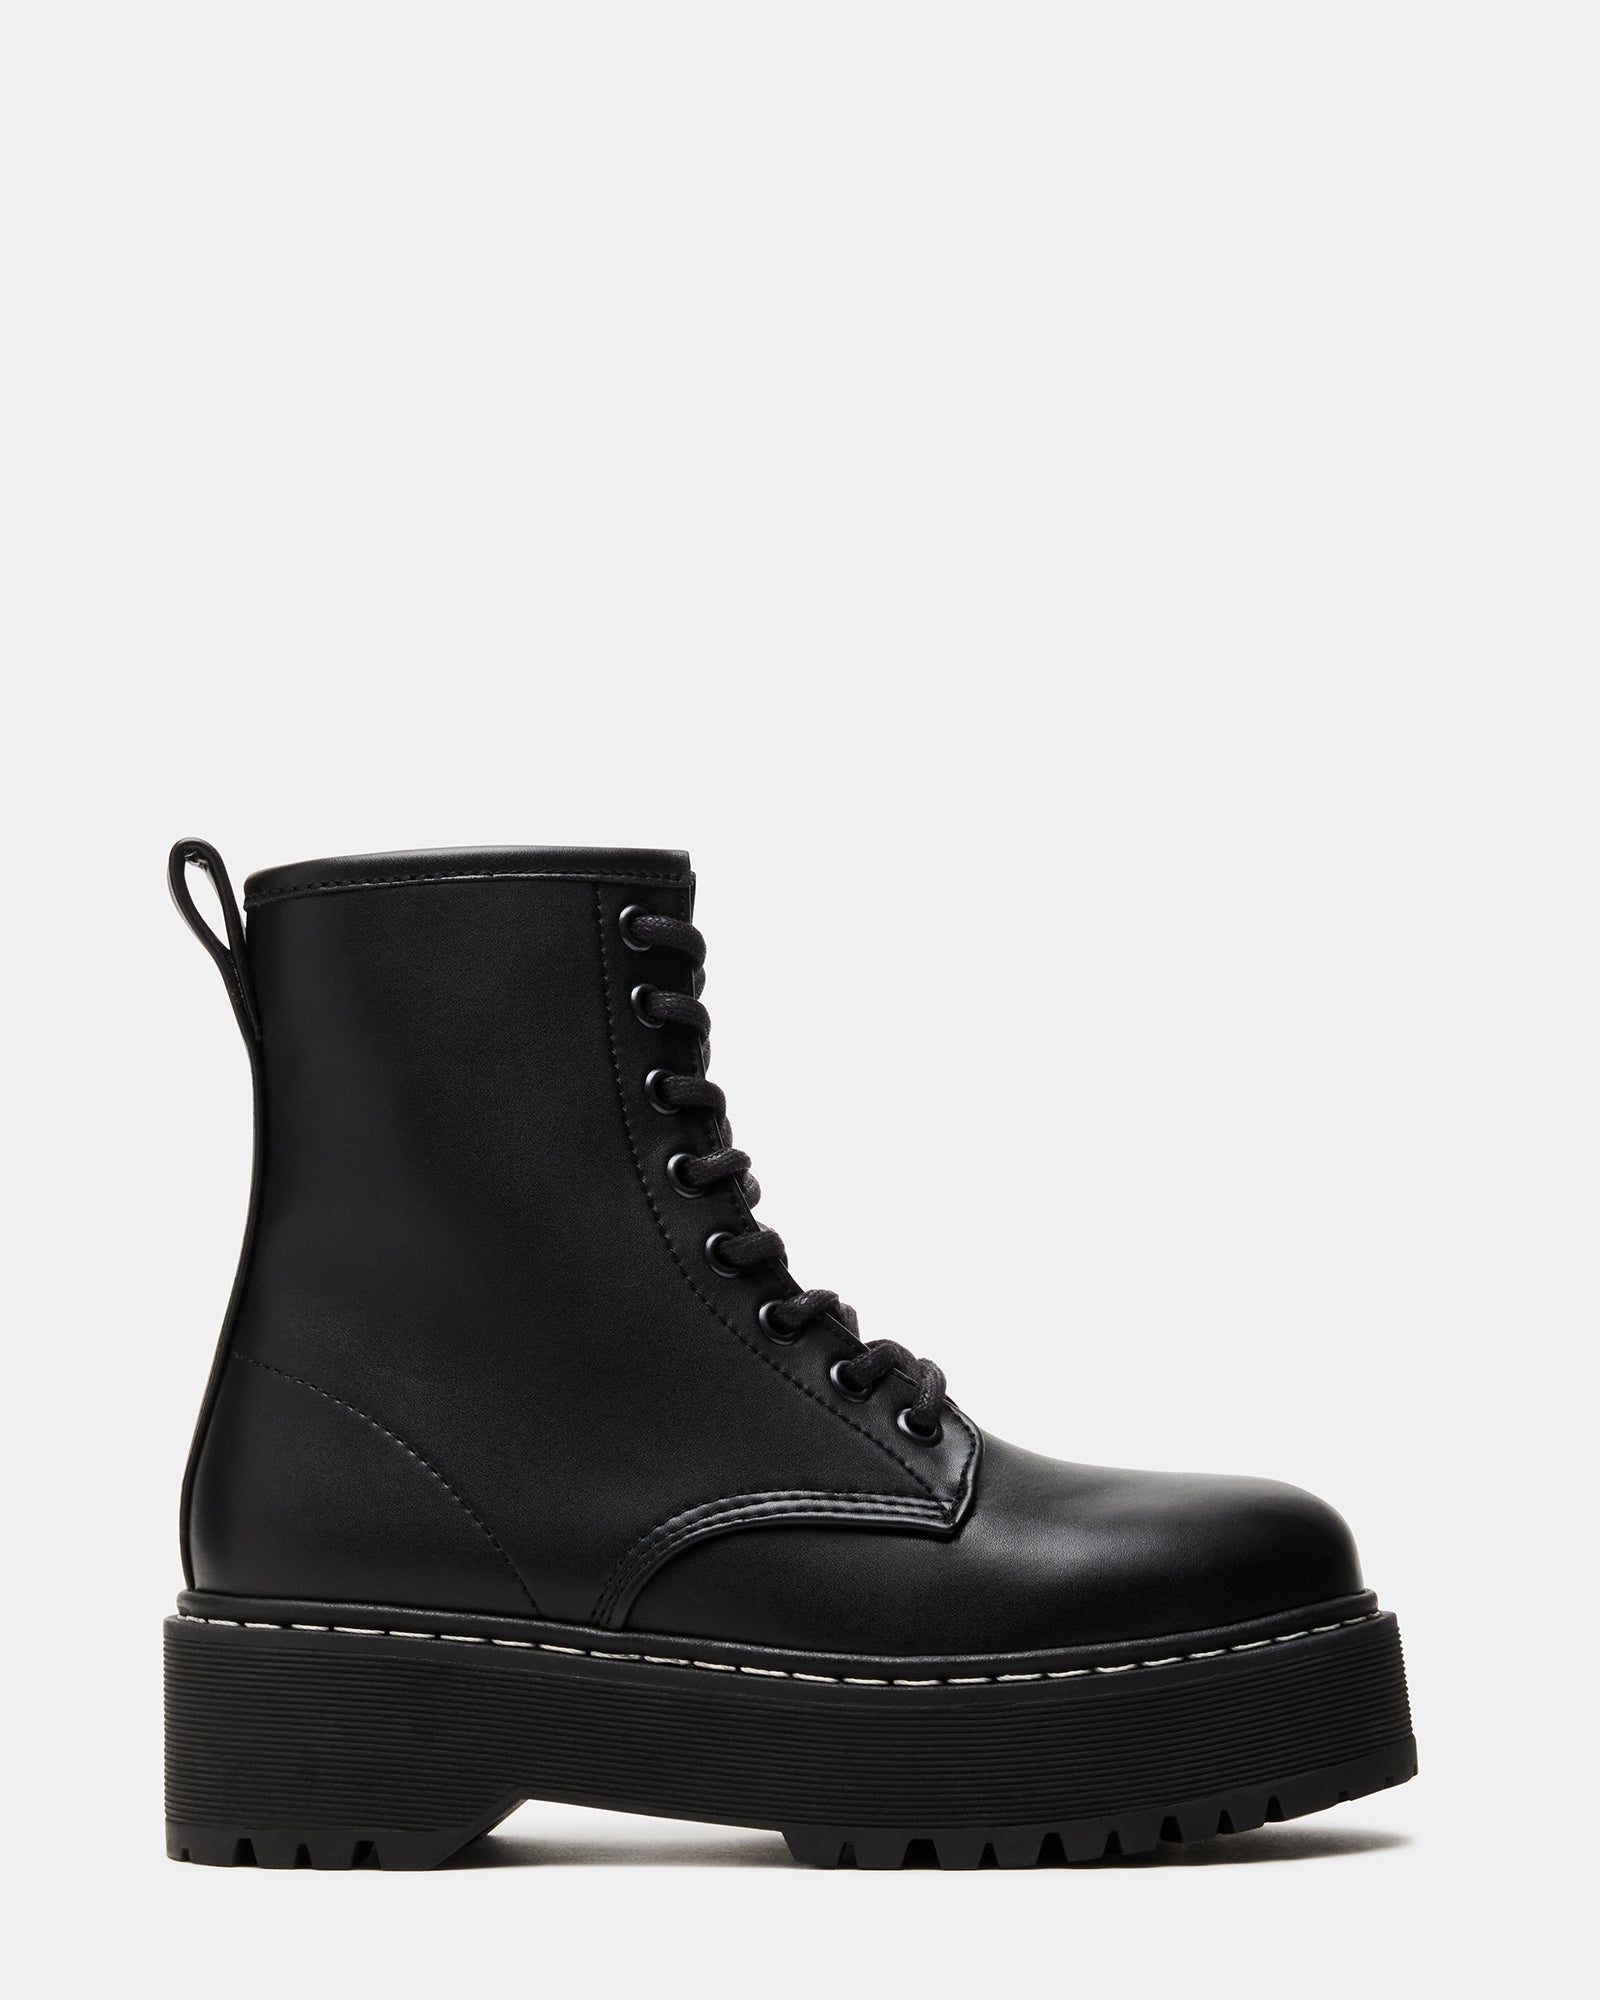 14 Chunky & Platform Combat Boots To Wear For Fall